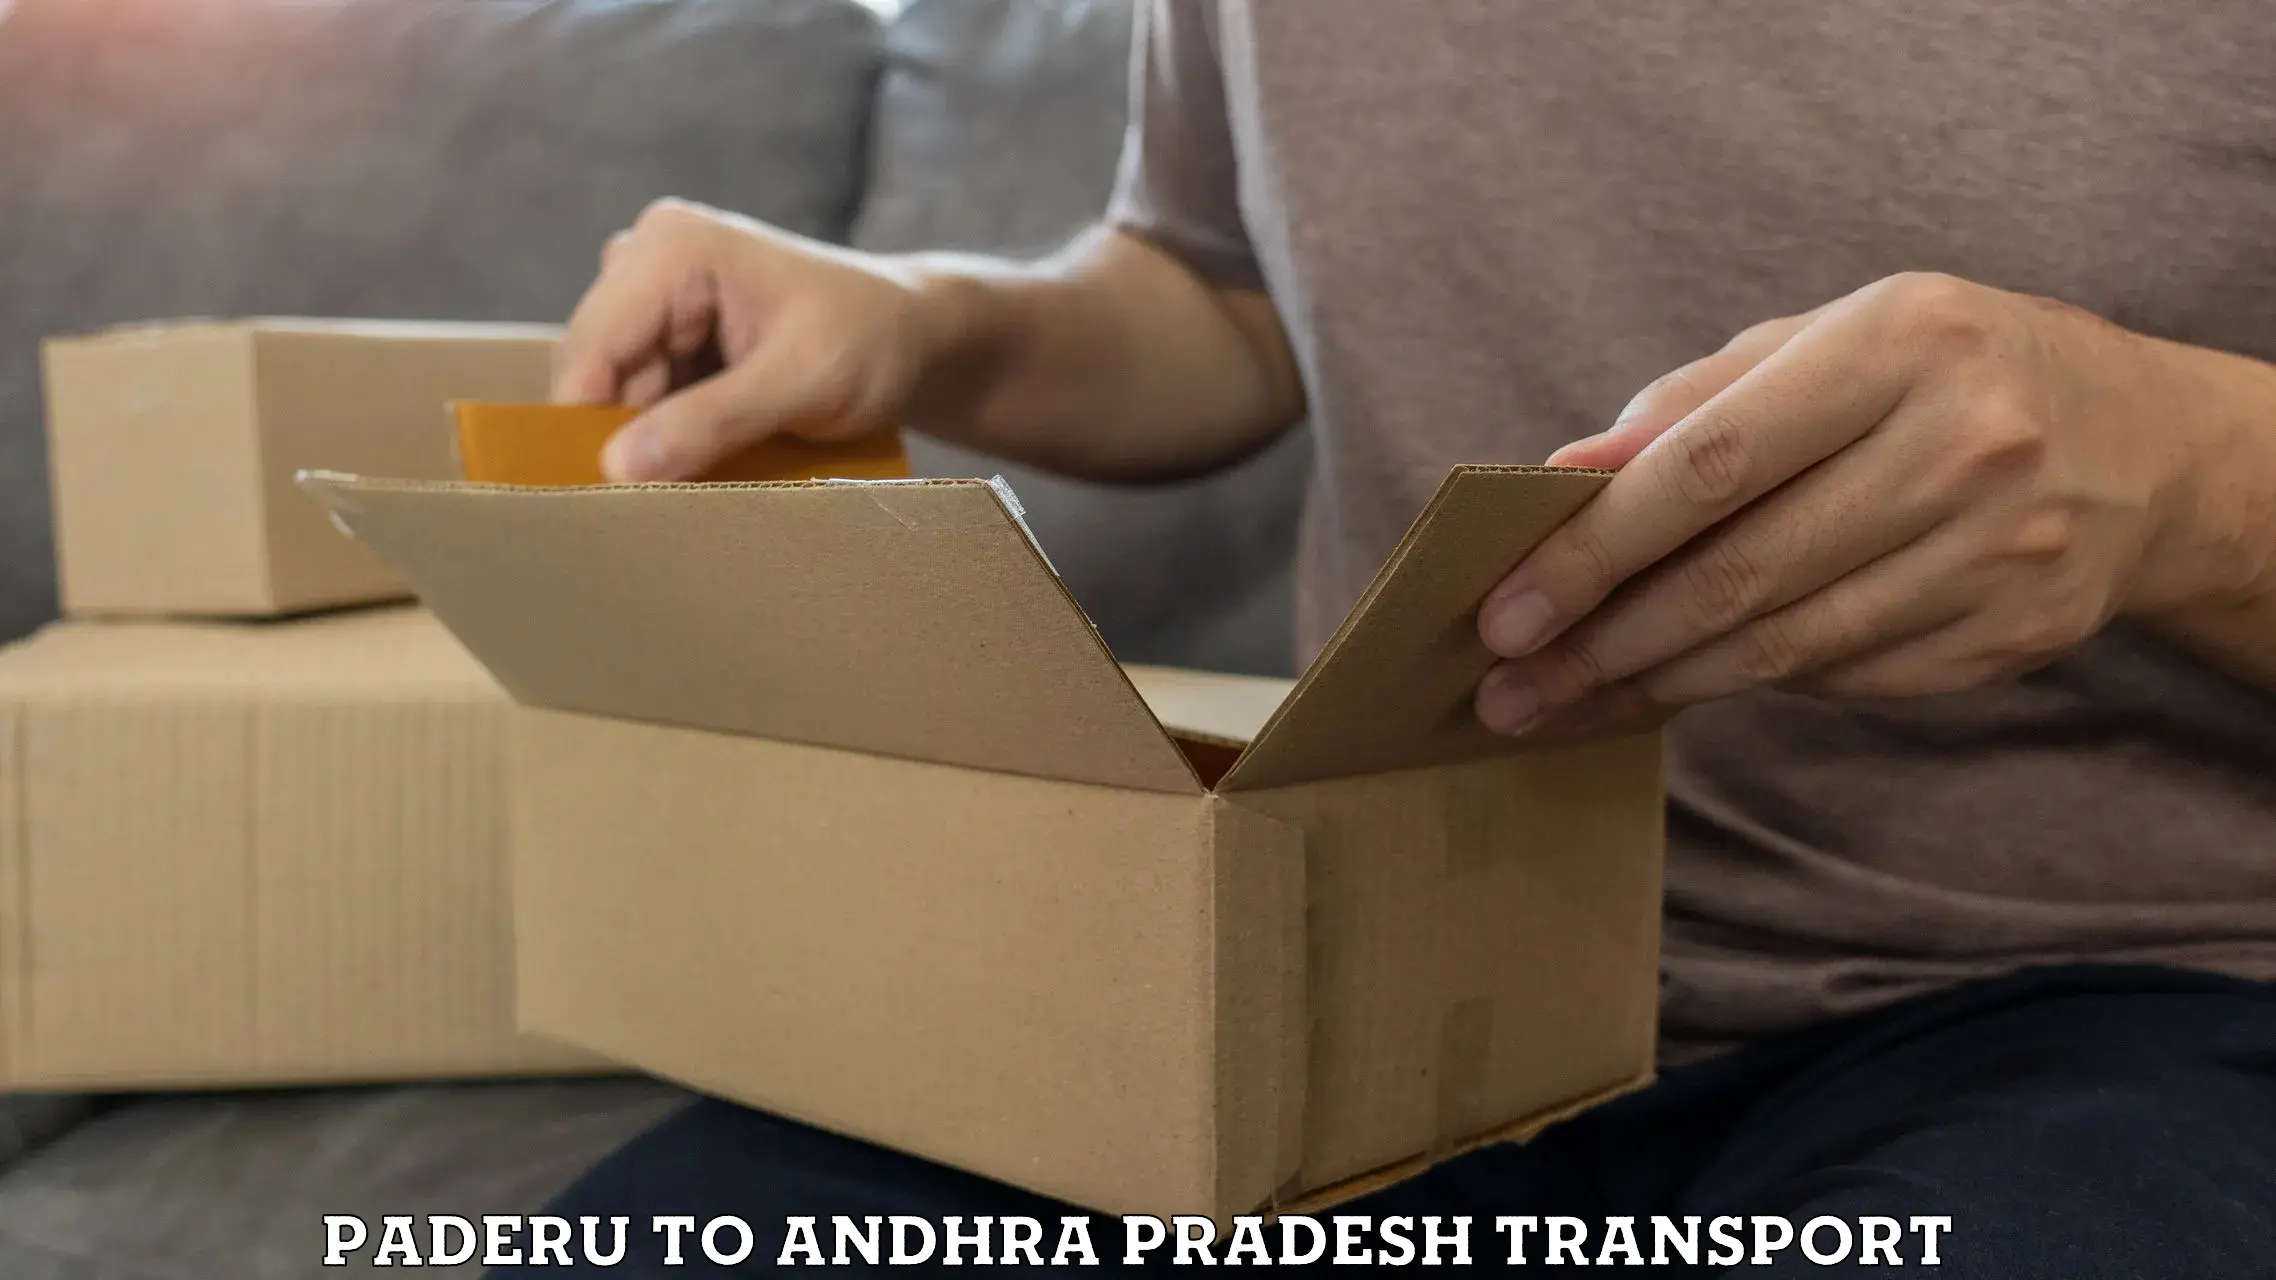 Transport bike from one state to another Paderu to Andhra Pradesh